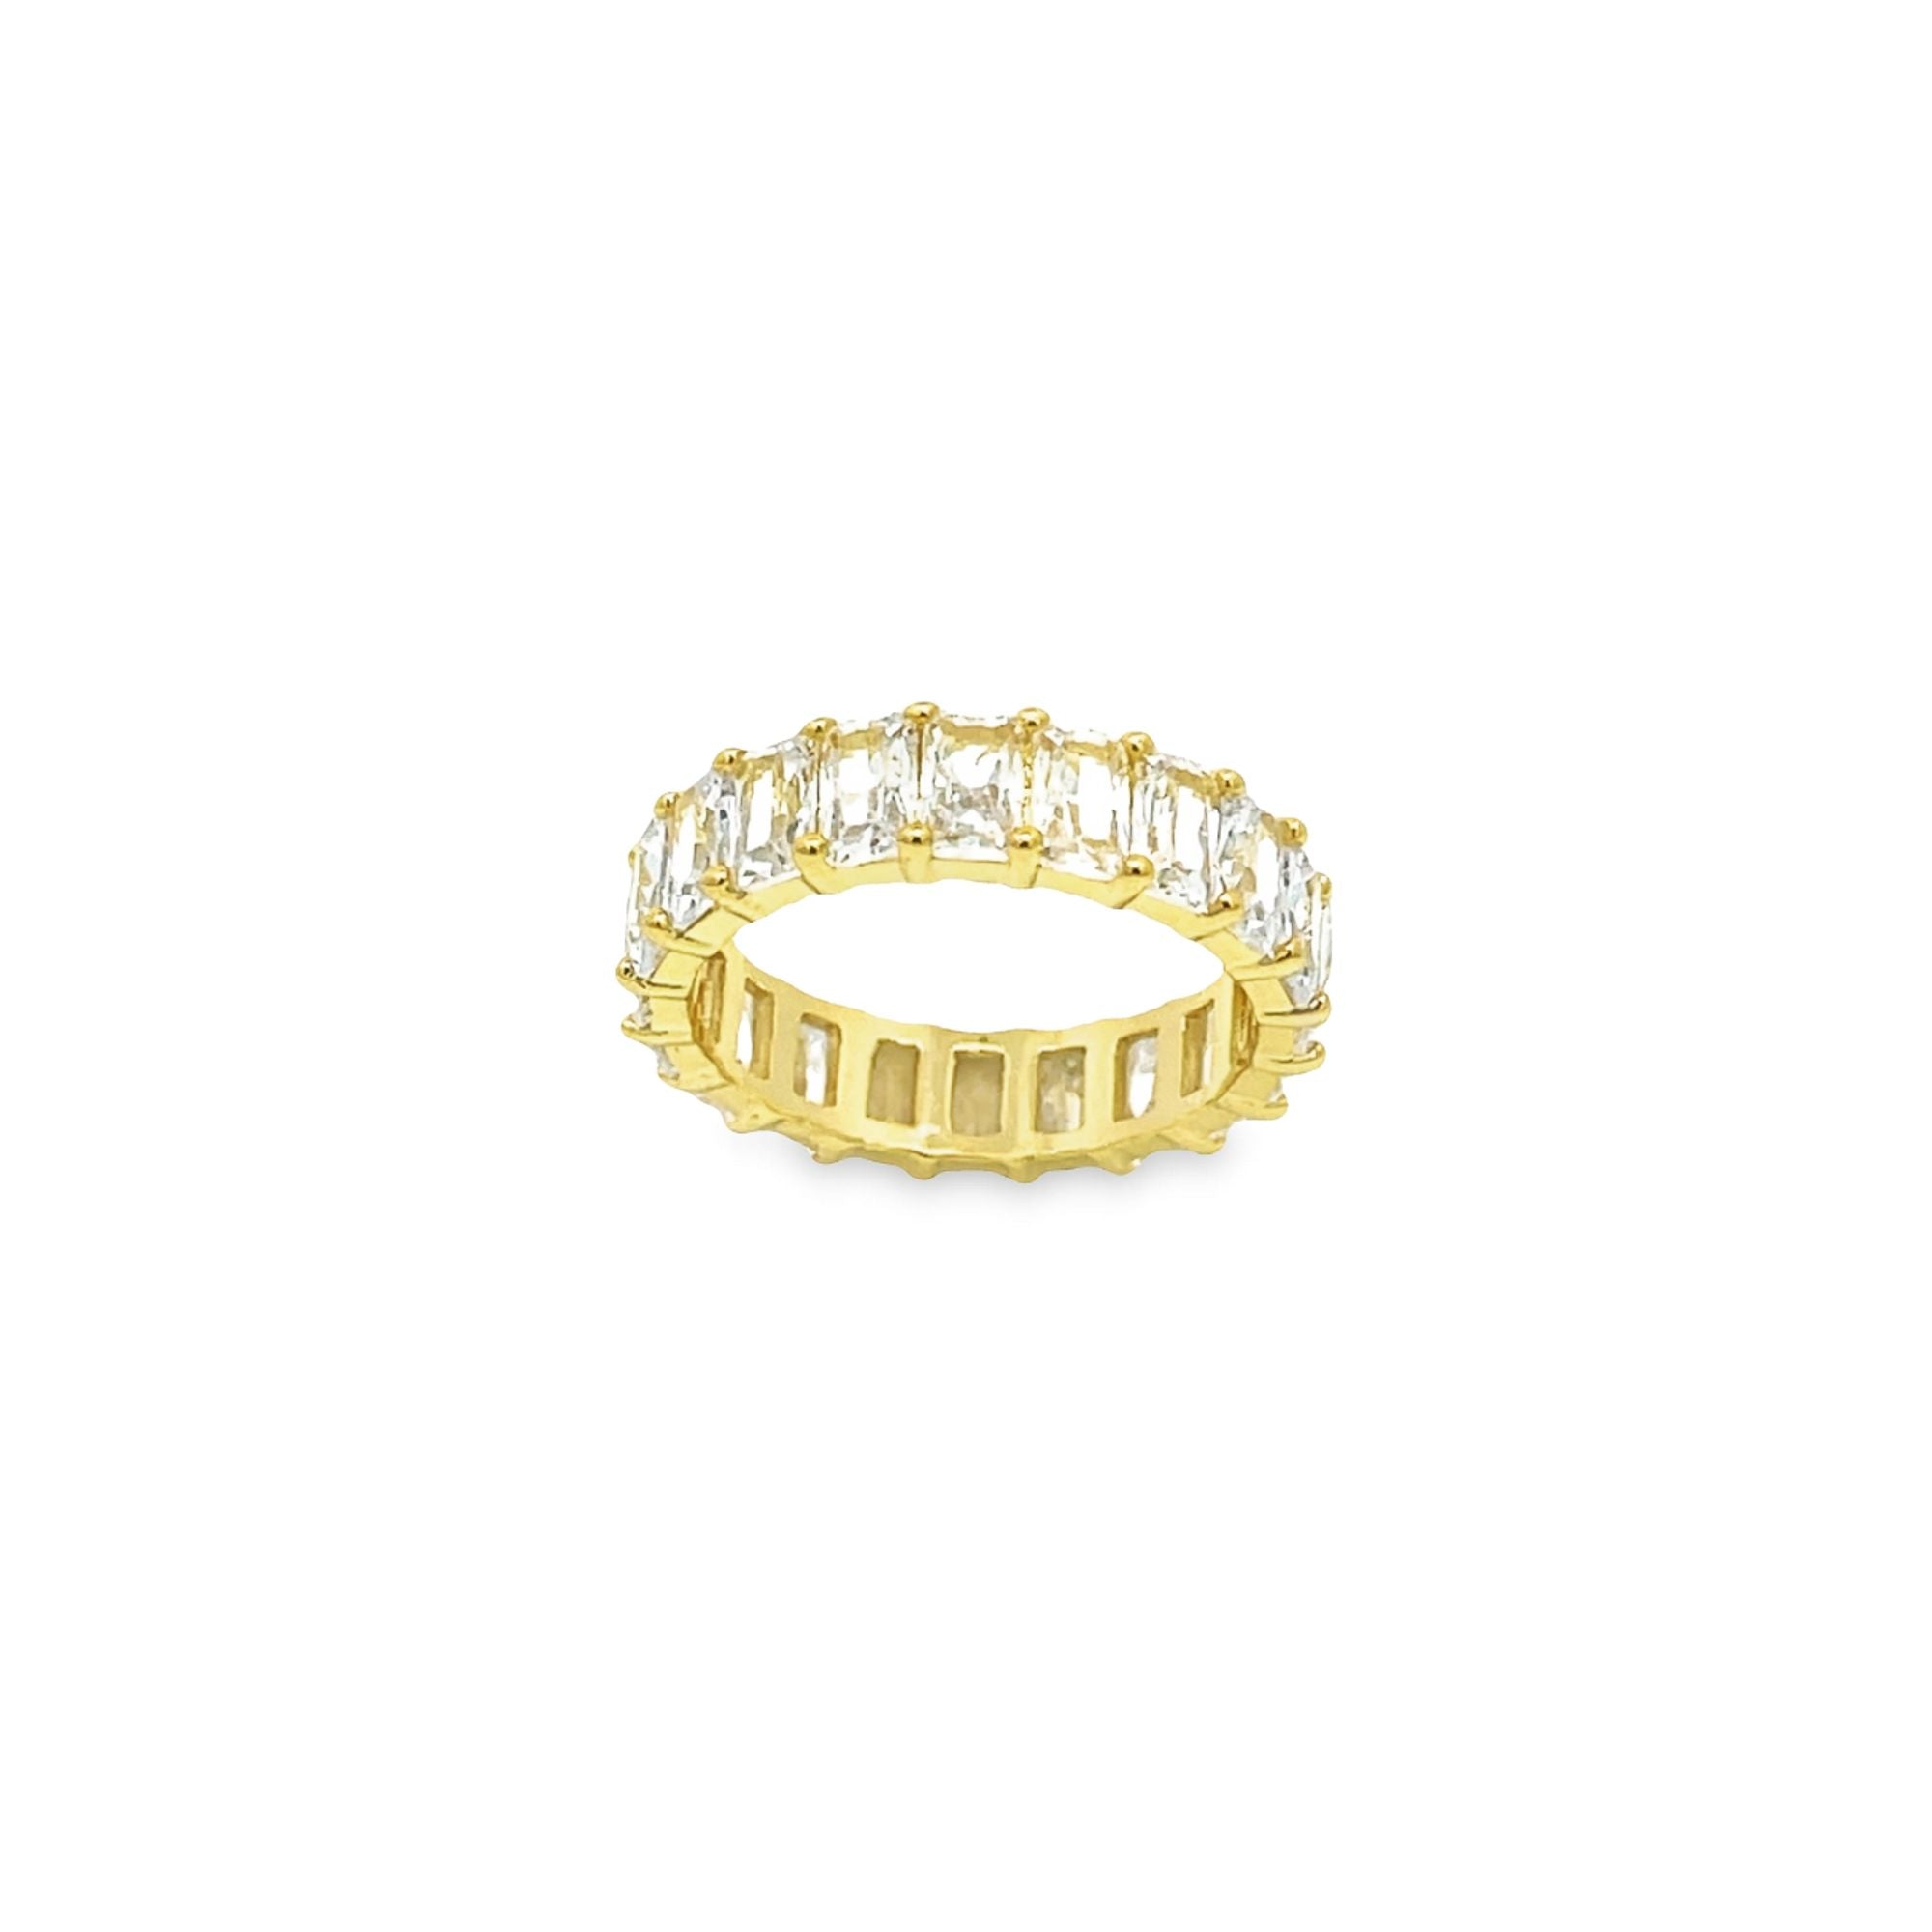 Open Cuff Bracelet with Round Cut Stones - Yellow Gold, Size Medium, 18K - The GLD Shop